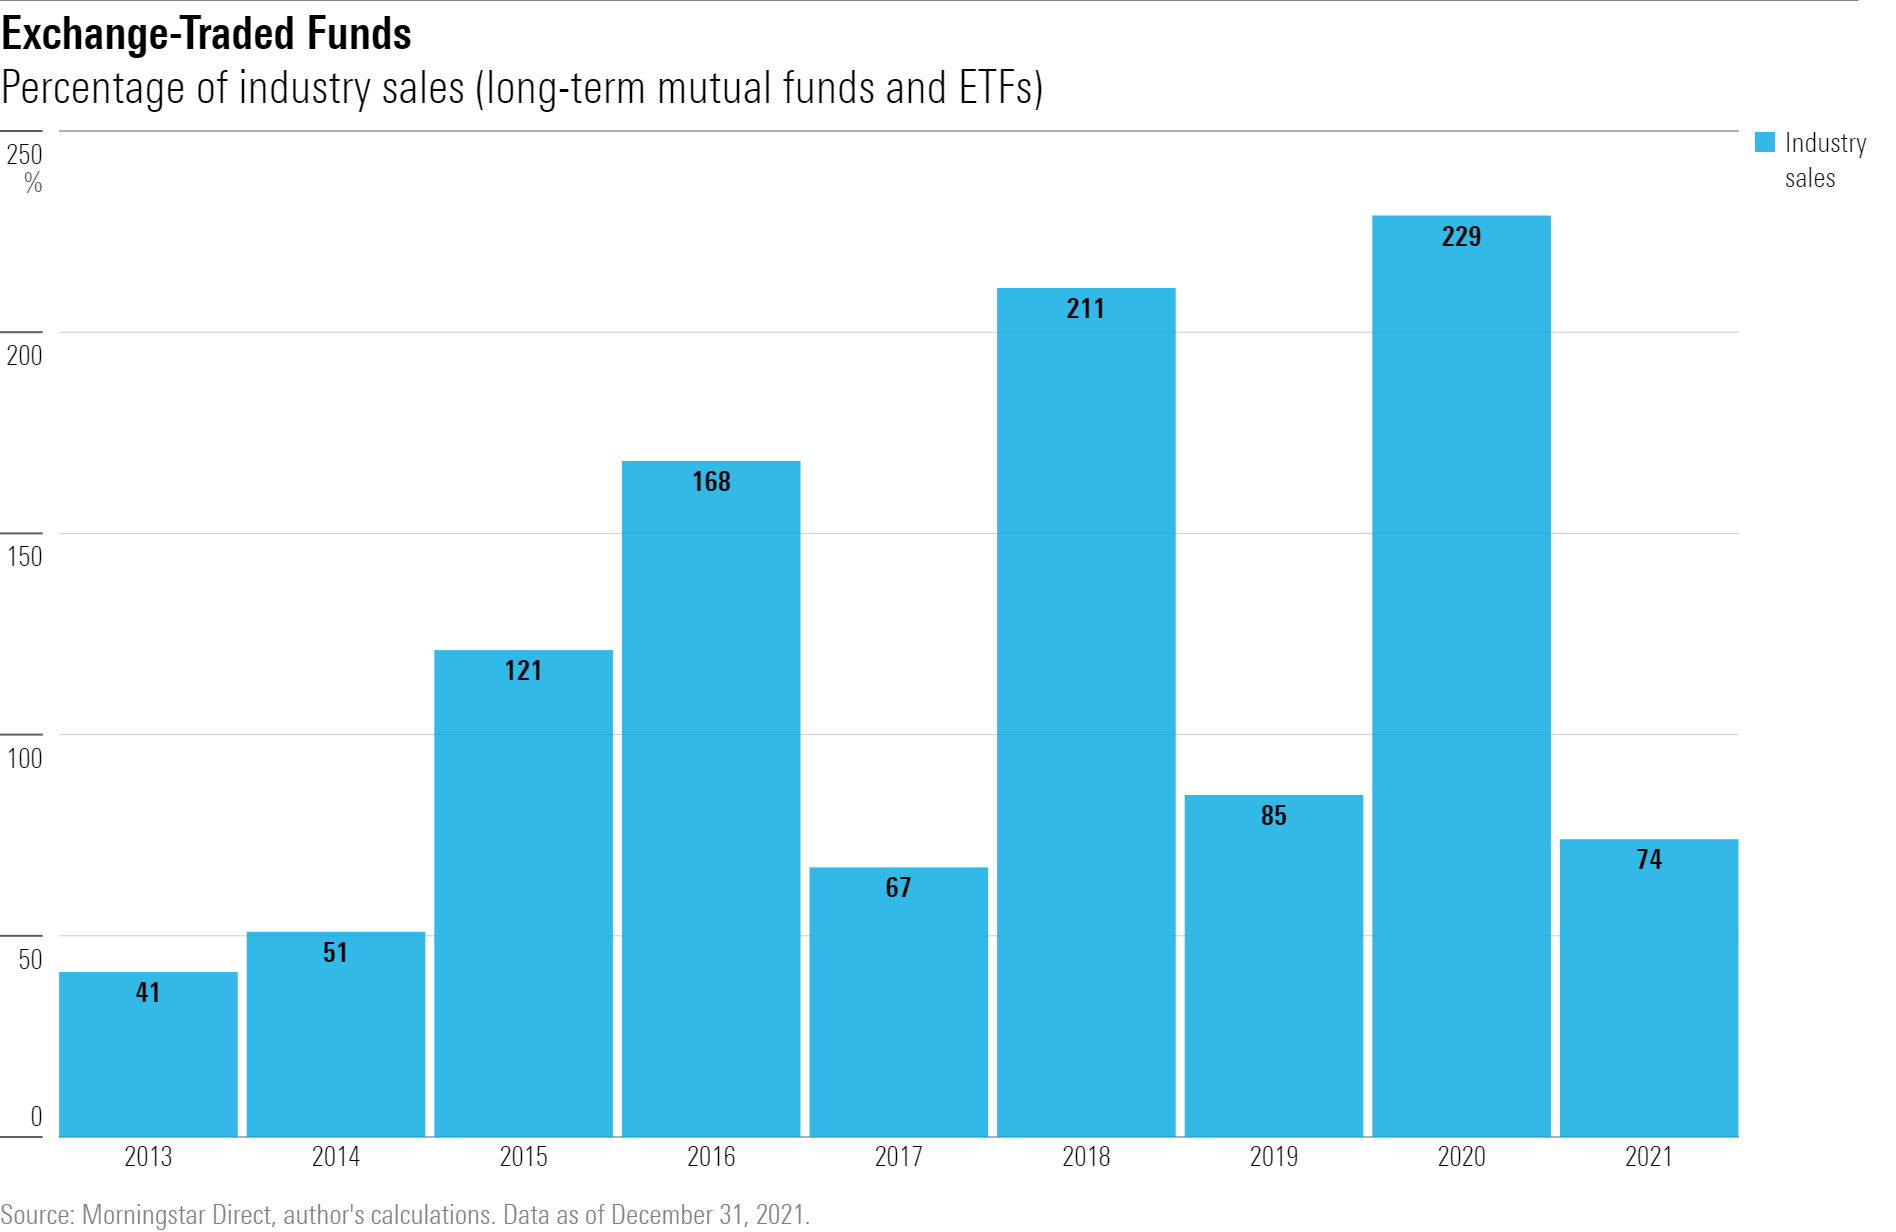 The percentage of fund industry sales, from 2013 through 2021, accounted for by exchange-traded funds